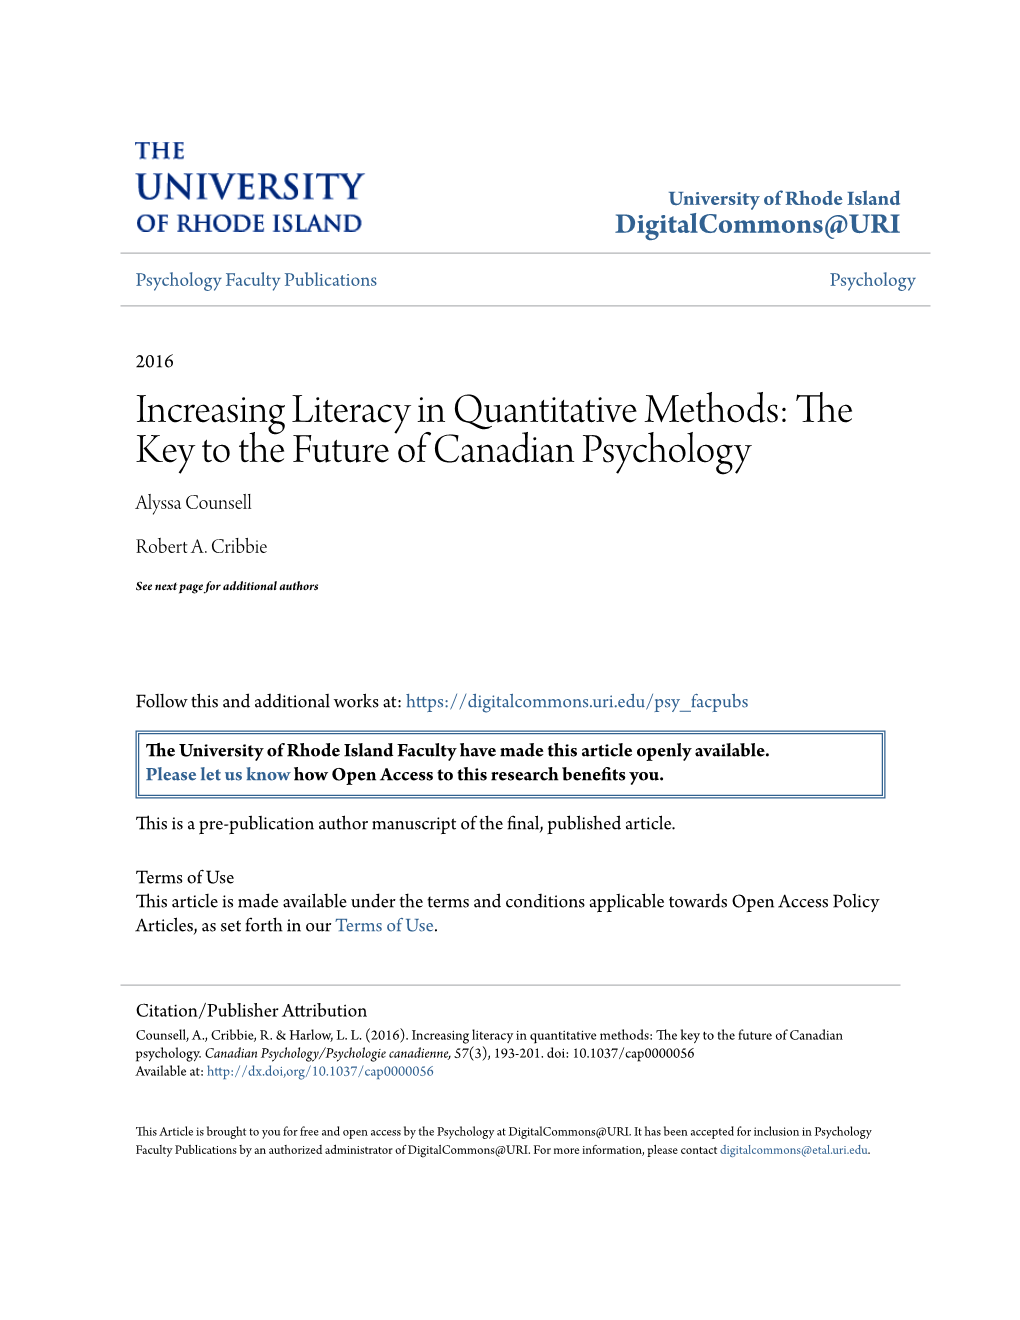 Increasing Literacy in Quantitative Methods: the Key to the Future of Canadian Psychology Alyssa Counsell